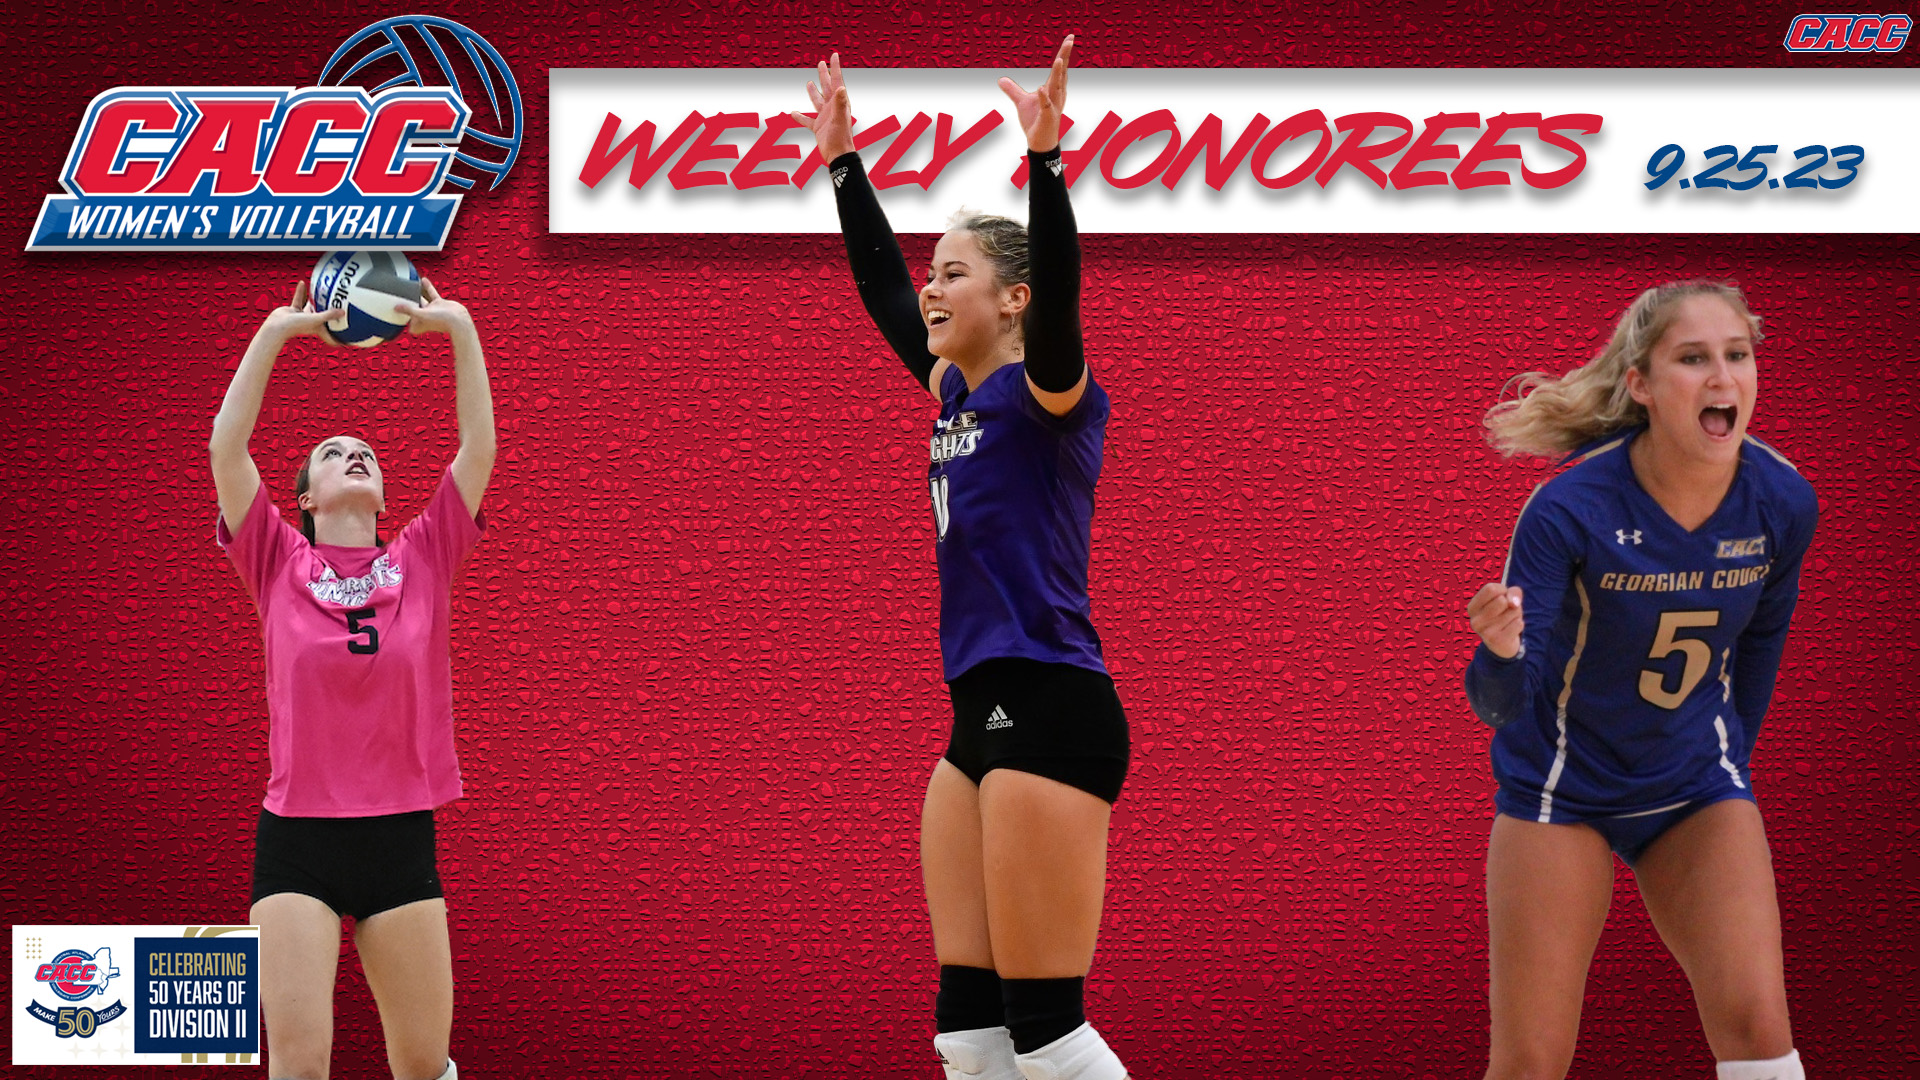 CACC Women's Volleyball Weekly Honorees (9-25-23)